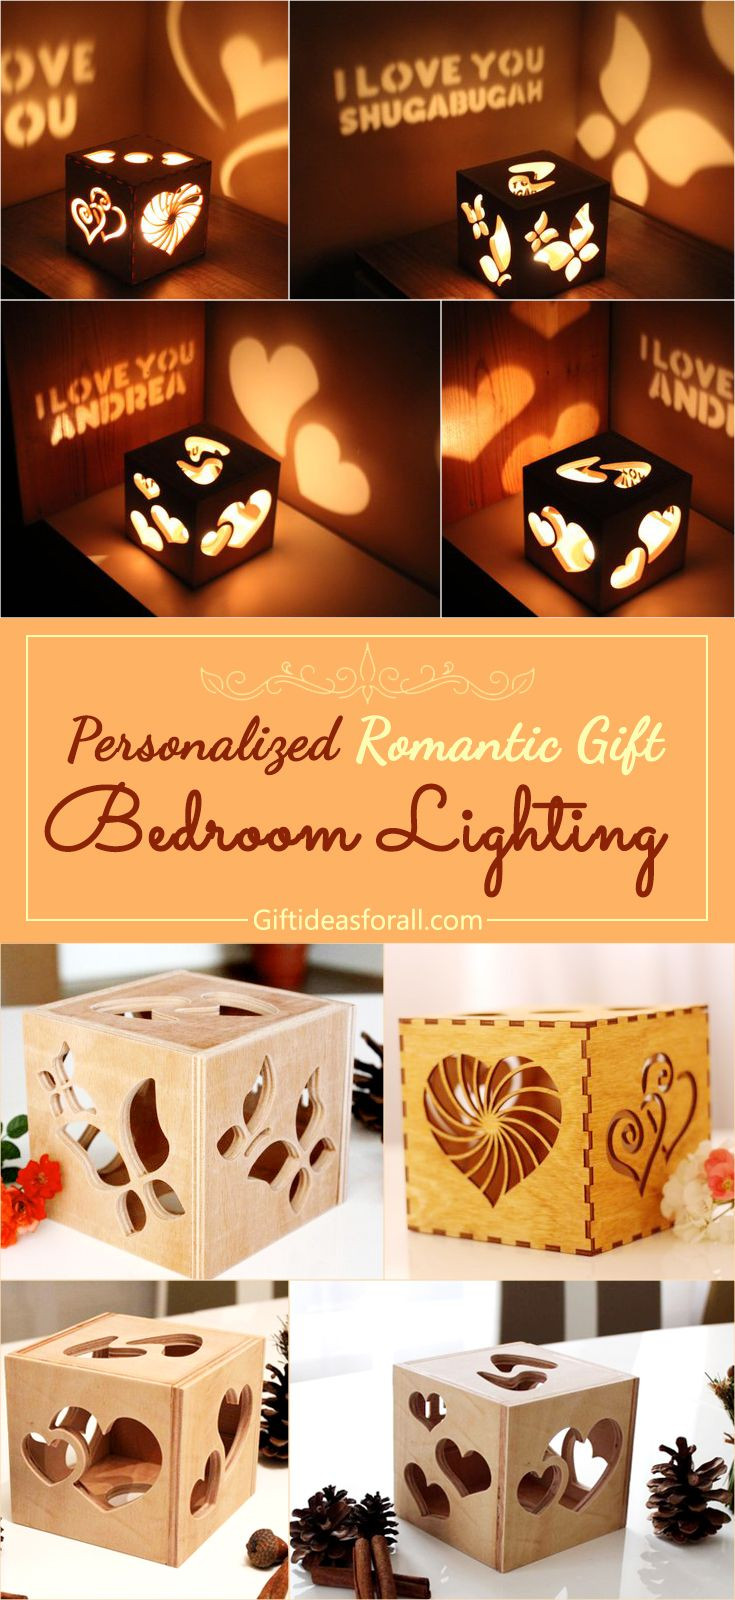 Girlfriends Birthday Gift Ideas
 Personalized romantic bedroom lighting Gifts Giftideas